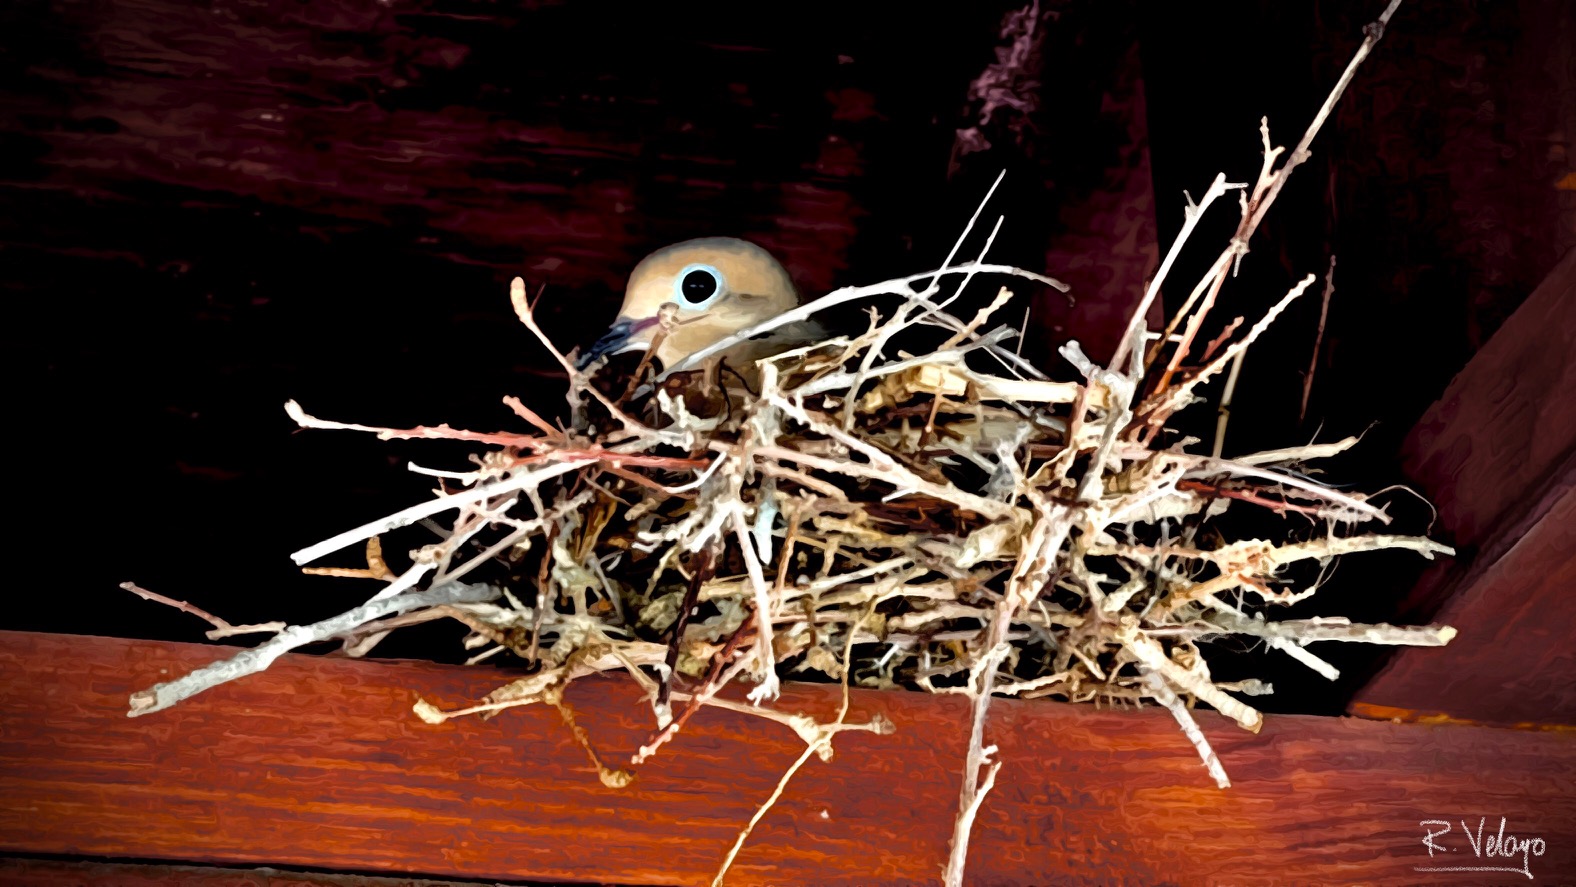 "MOTHER BIRD AND NEST OUTSIDE ST. PETE BUDDHIST TEMPLE" [Created: 3/16/2022]